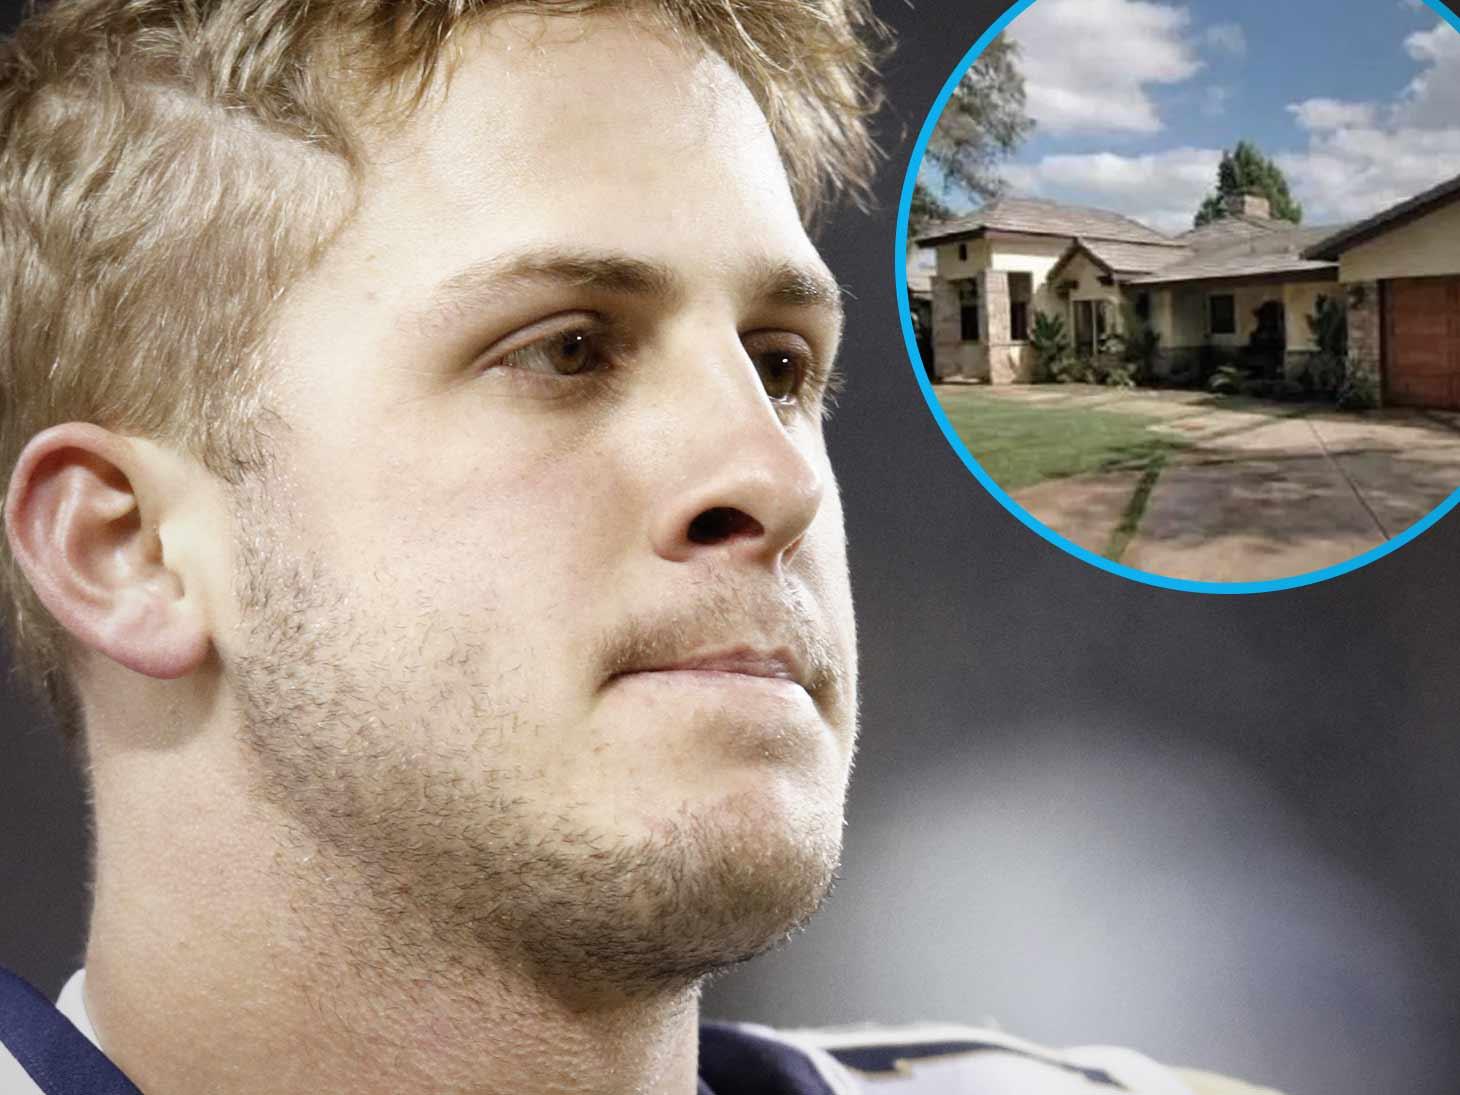 L.A. Rams QB Jared Goff Drops $4 Million to Buy Mansion in the Kardashian’s Neighborhood